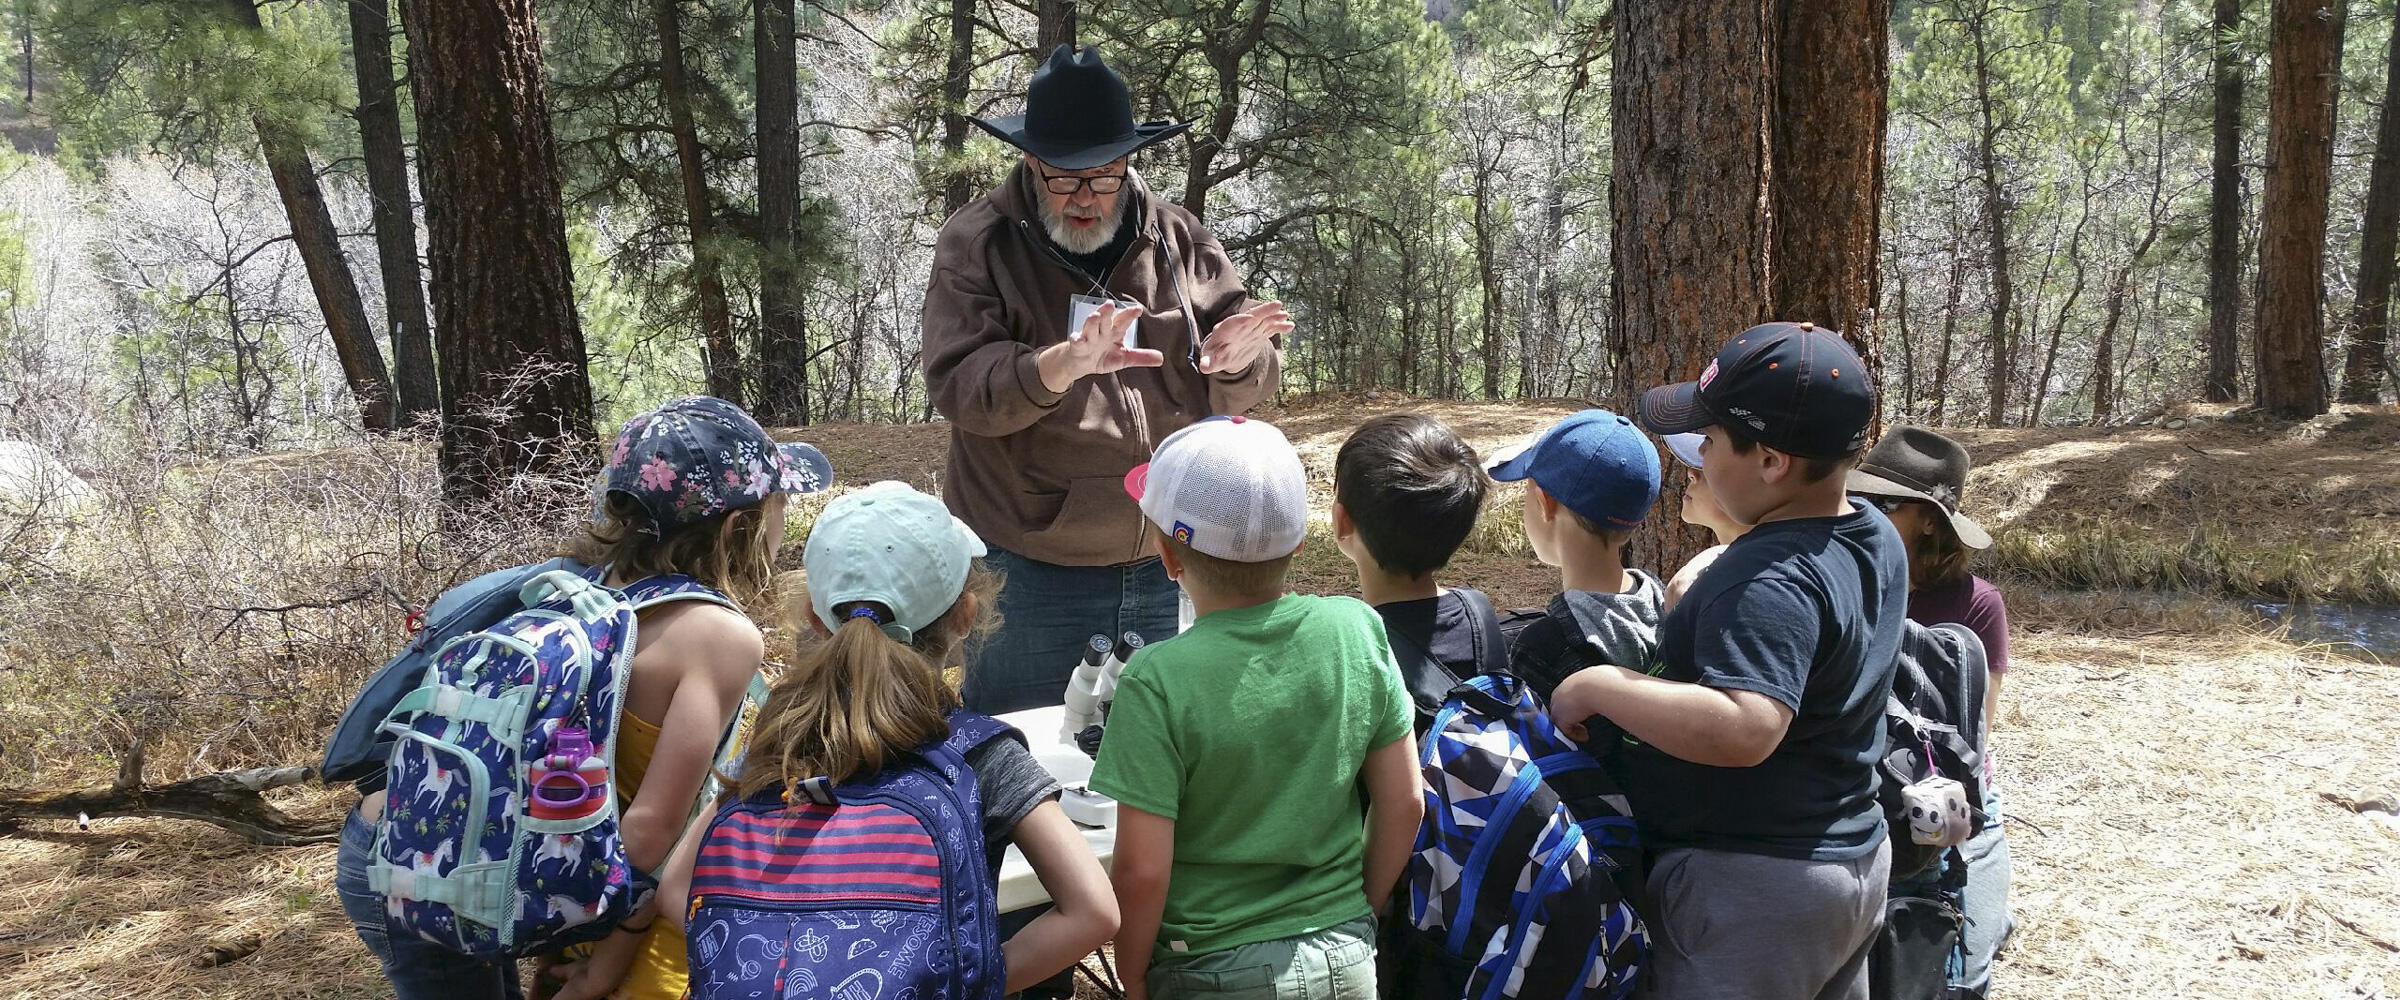 A man teaches a group of children about nature in a forest.